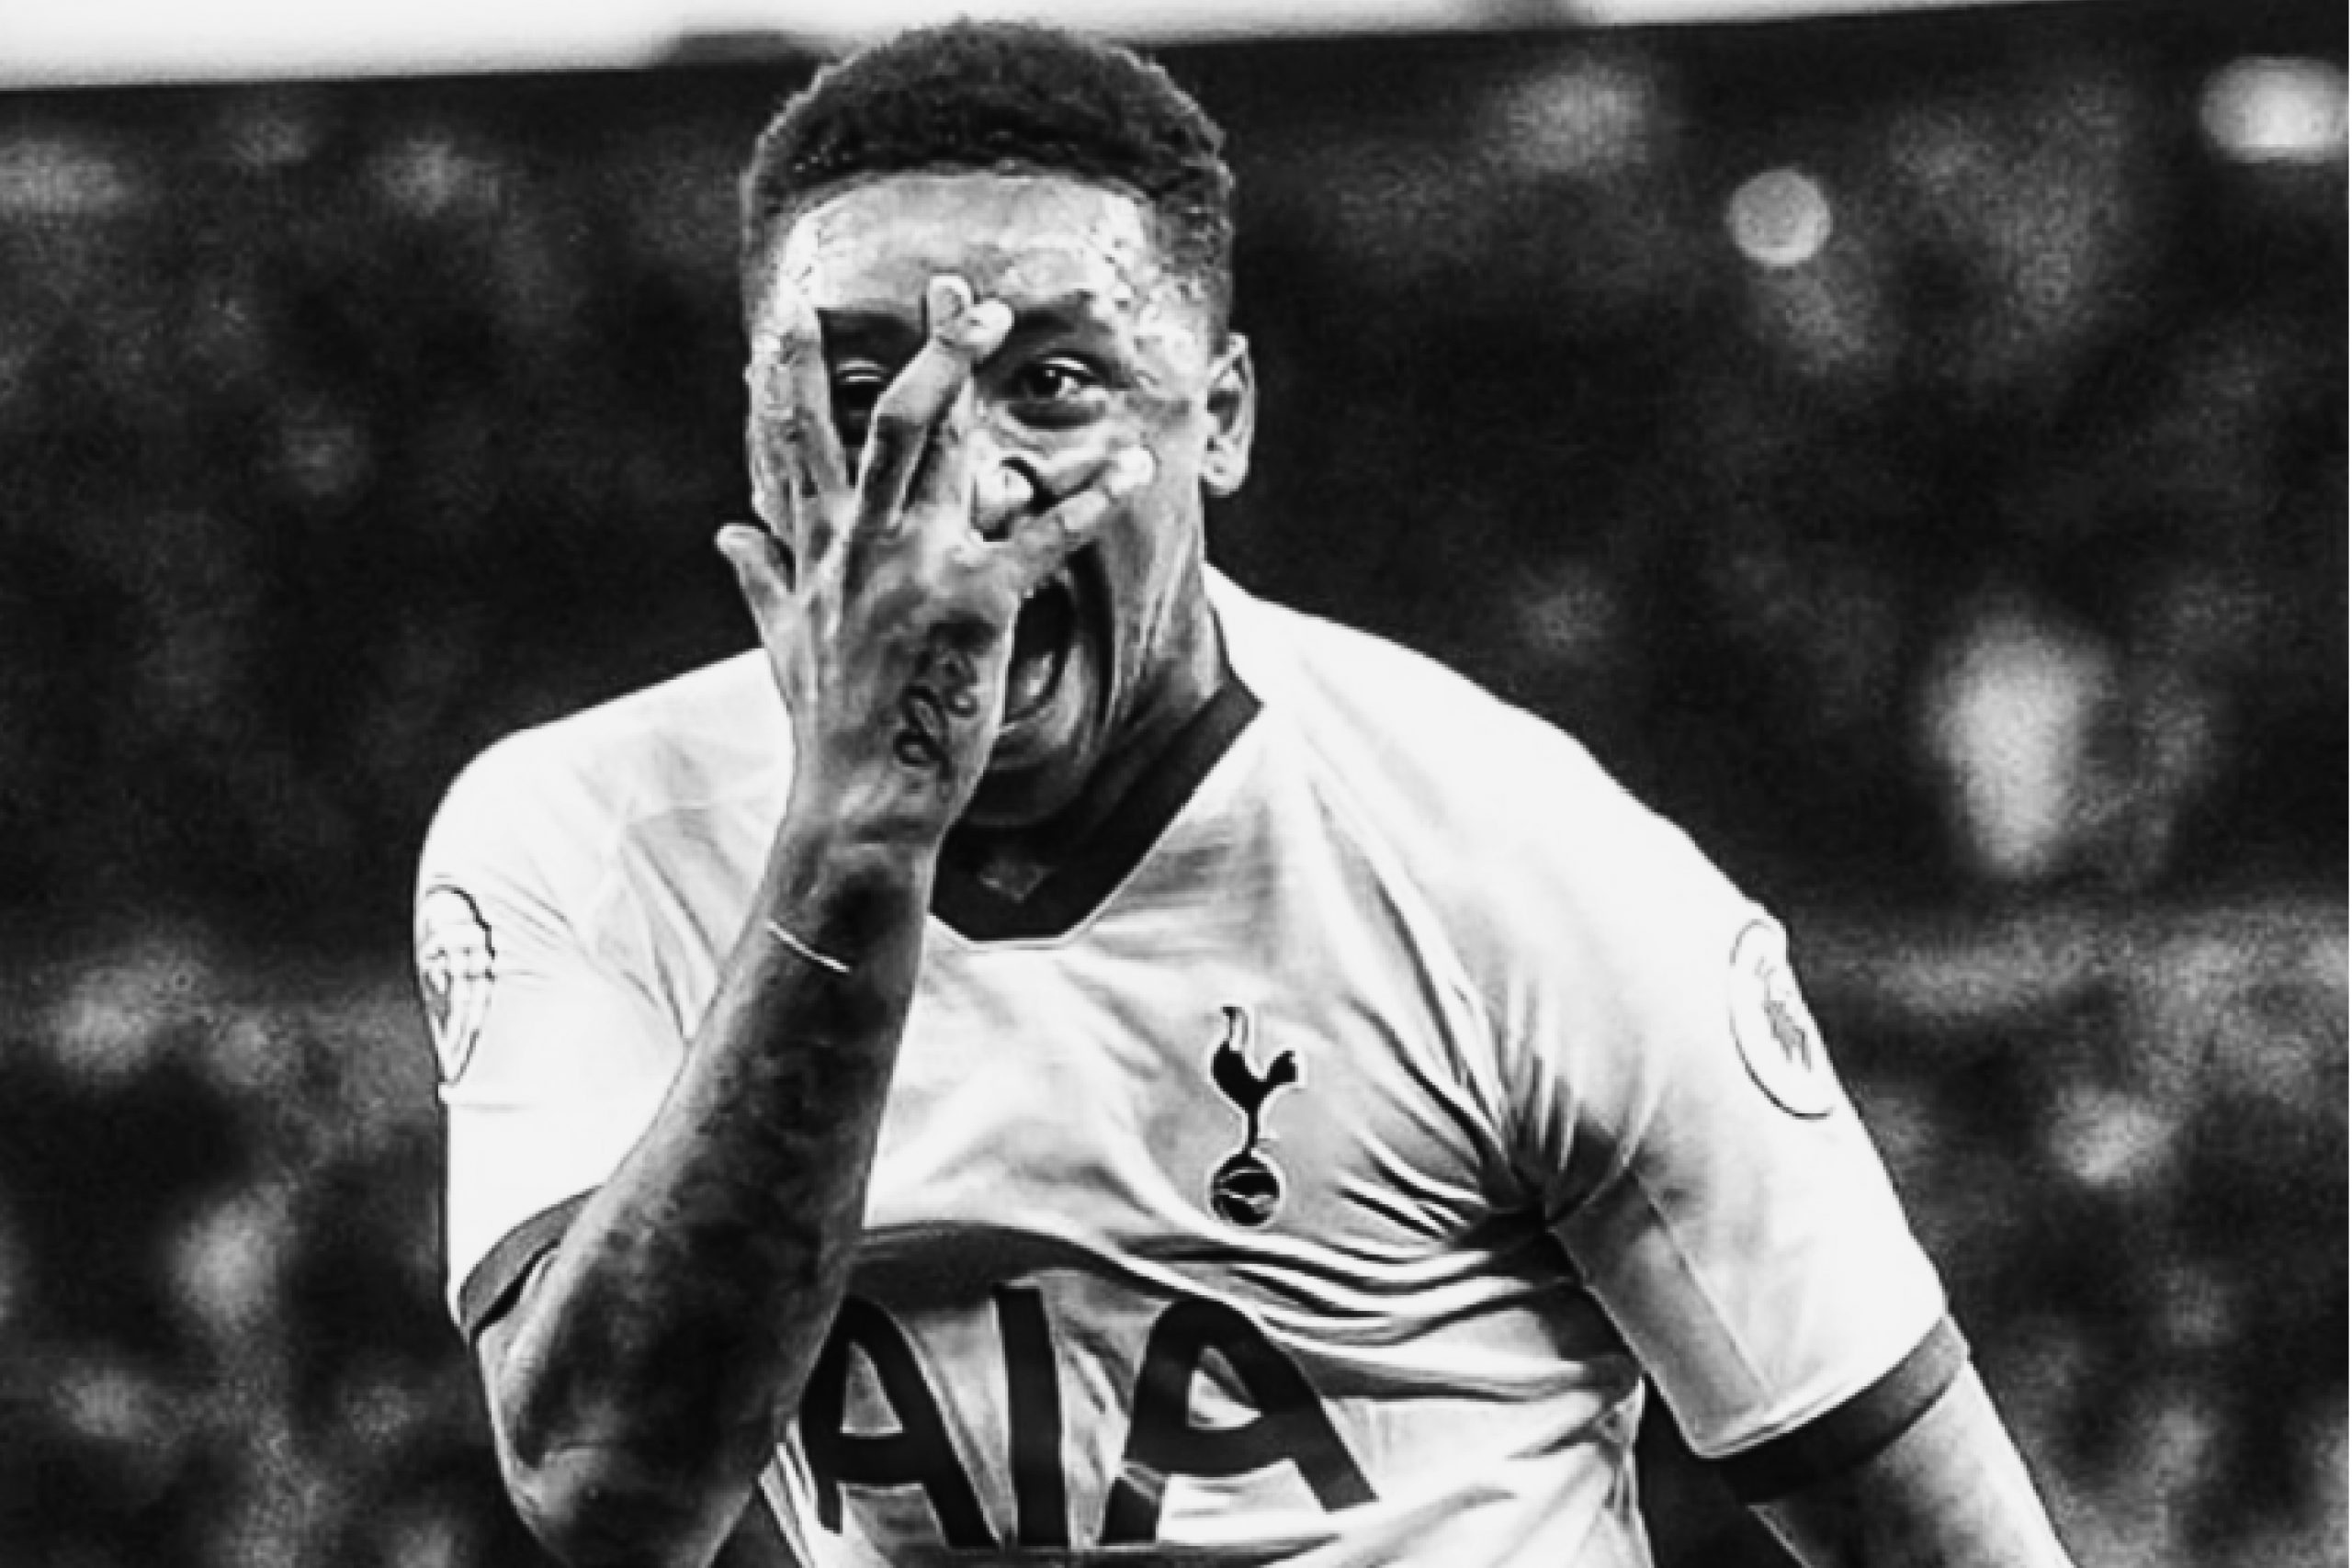 Steven Bergwijn hailed as footage drops of Spurs star working out late at night in Amsterdam